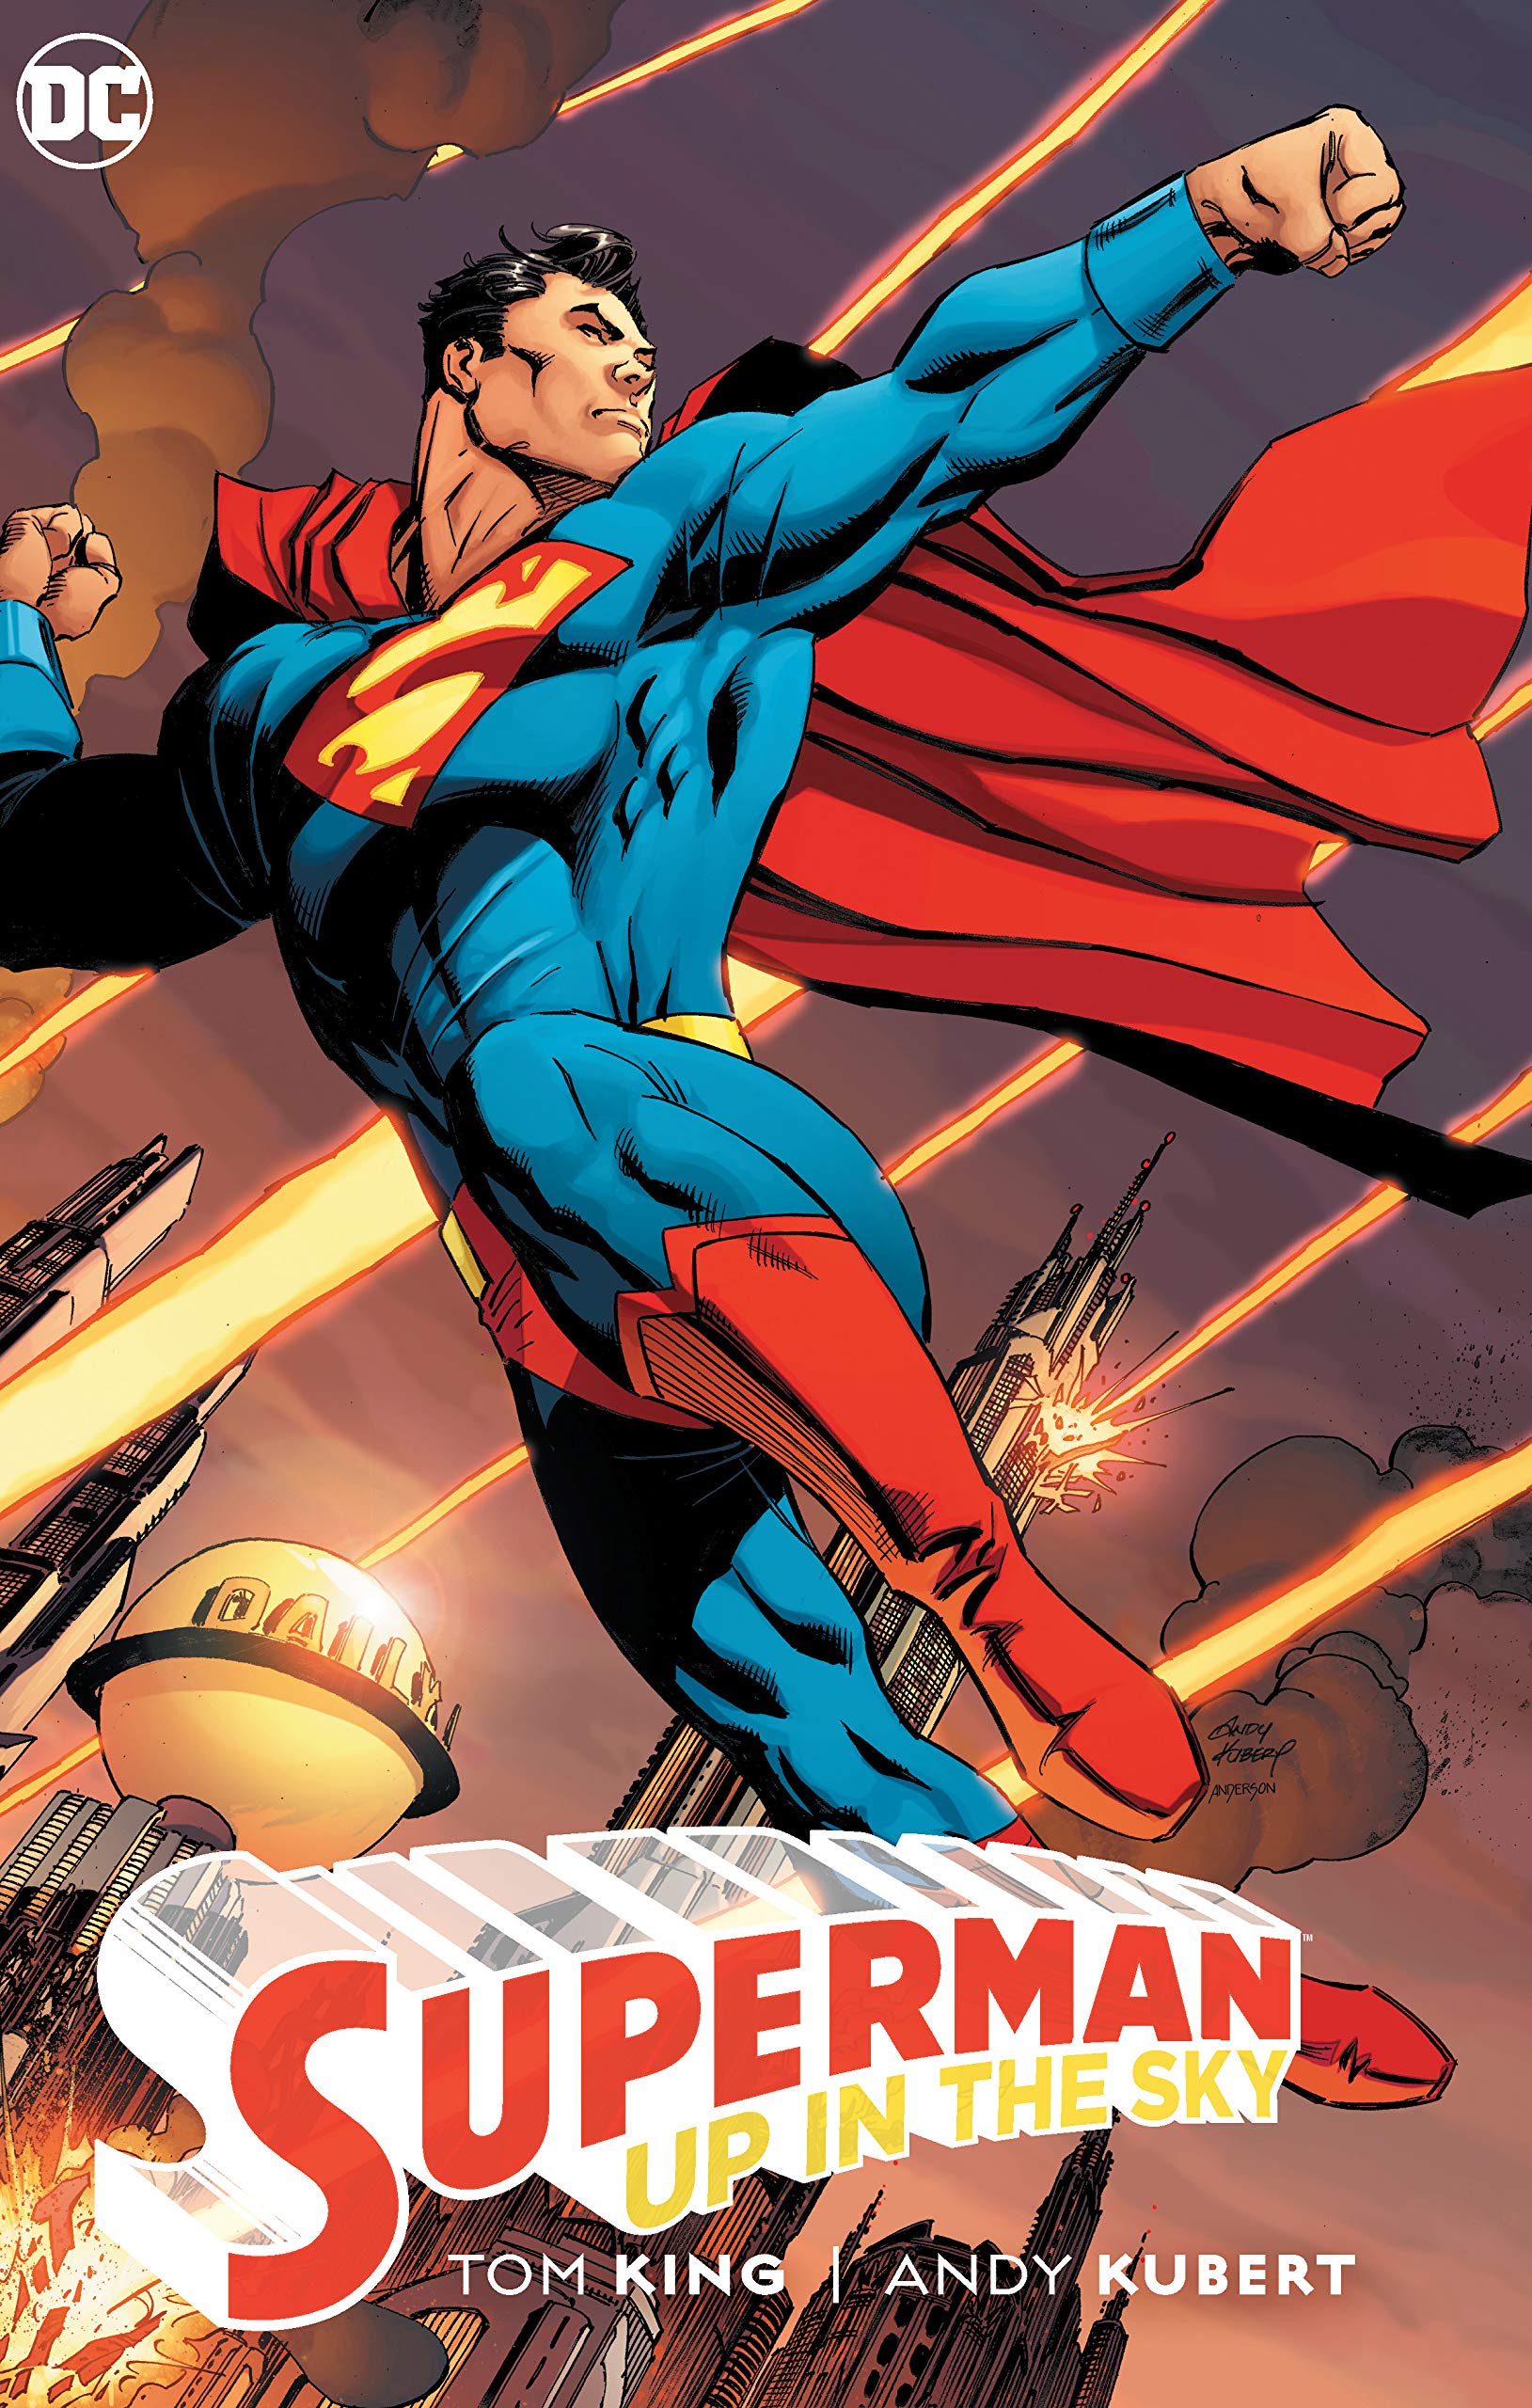 Superman: Up in the Sky | Tom King, Andy Kubert